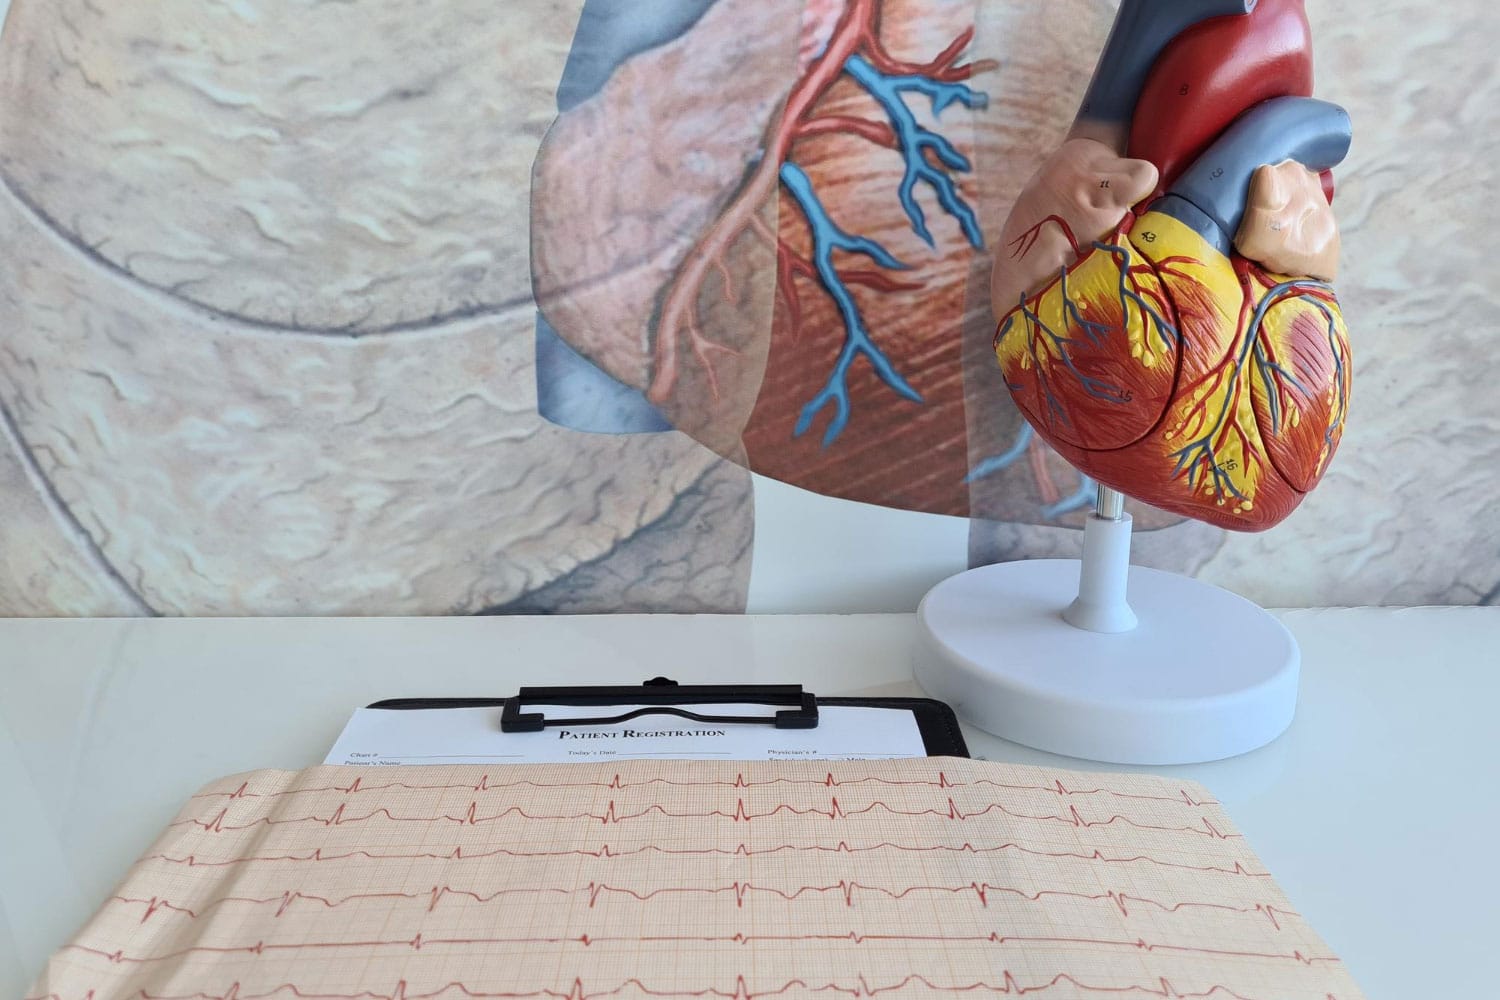 Heart cardiovascular disease and electrocardiogram of patient